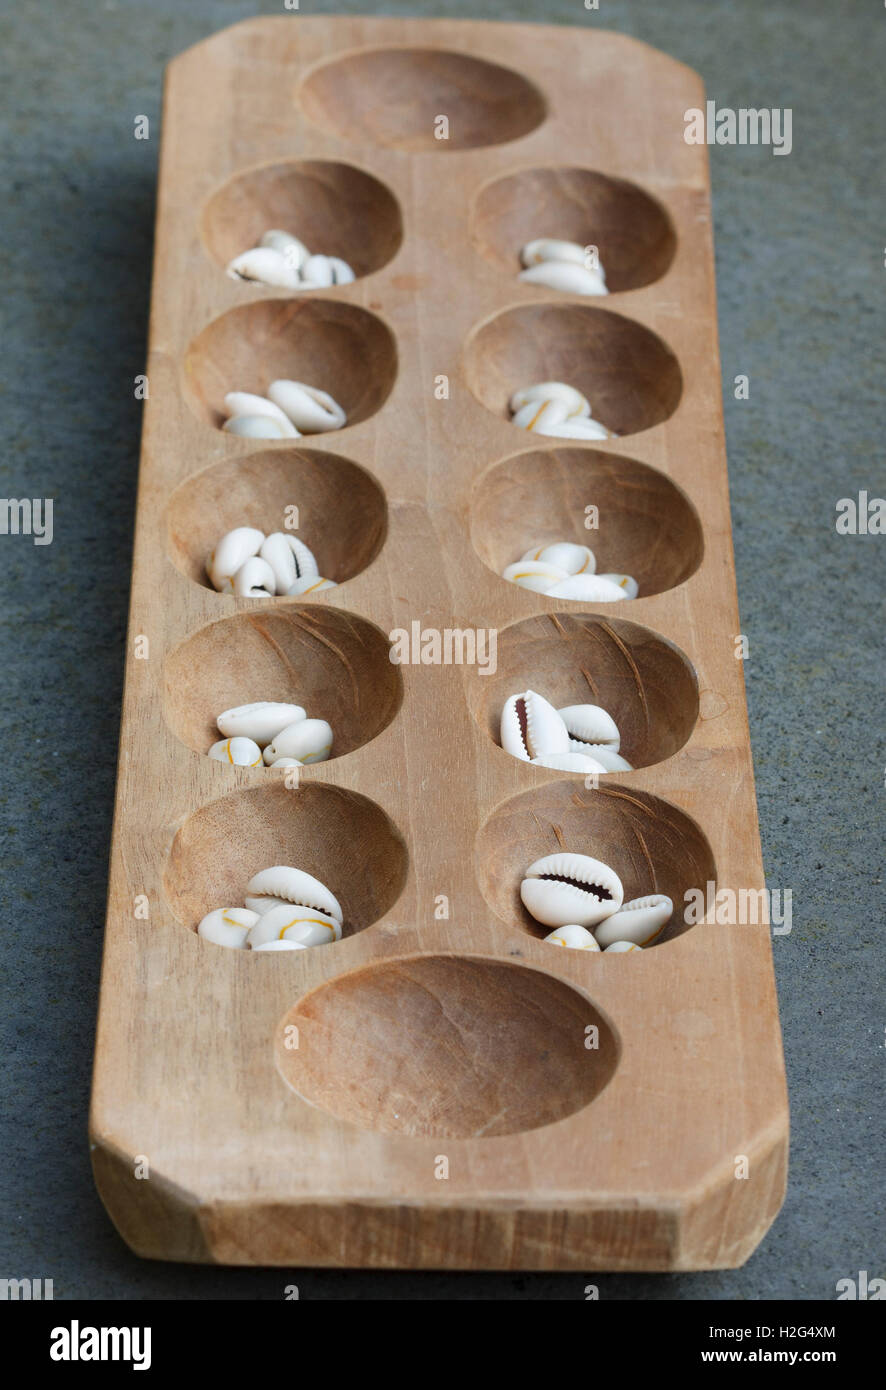 Mancala board with shells. Mancala is a traditional board game played around the world. Stock Photo